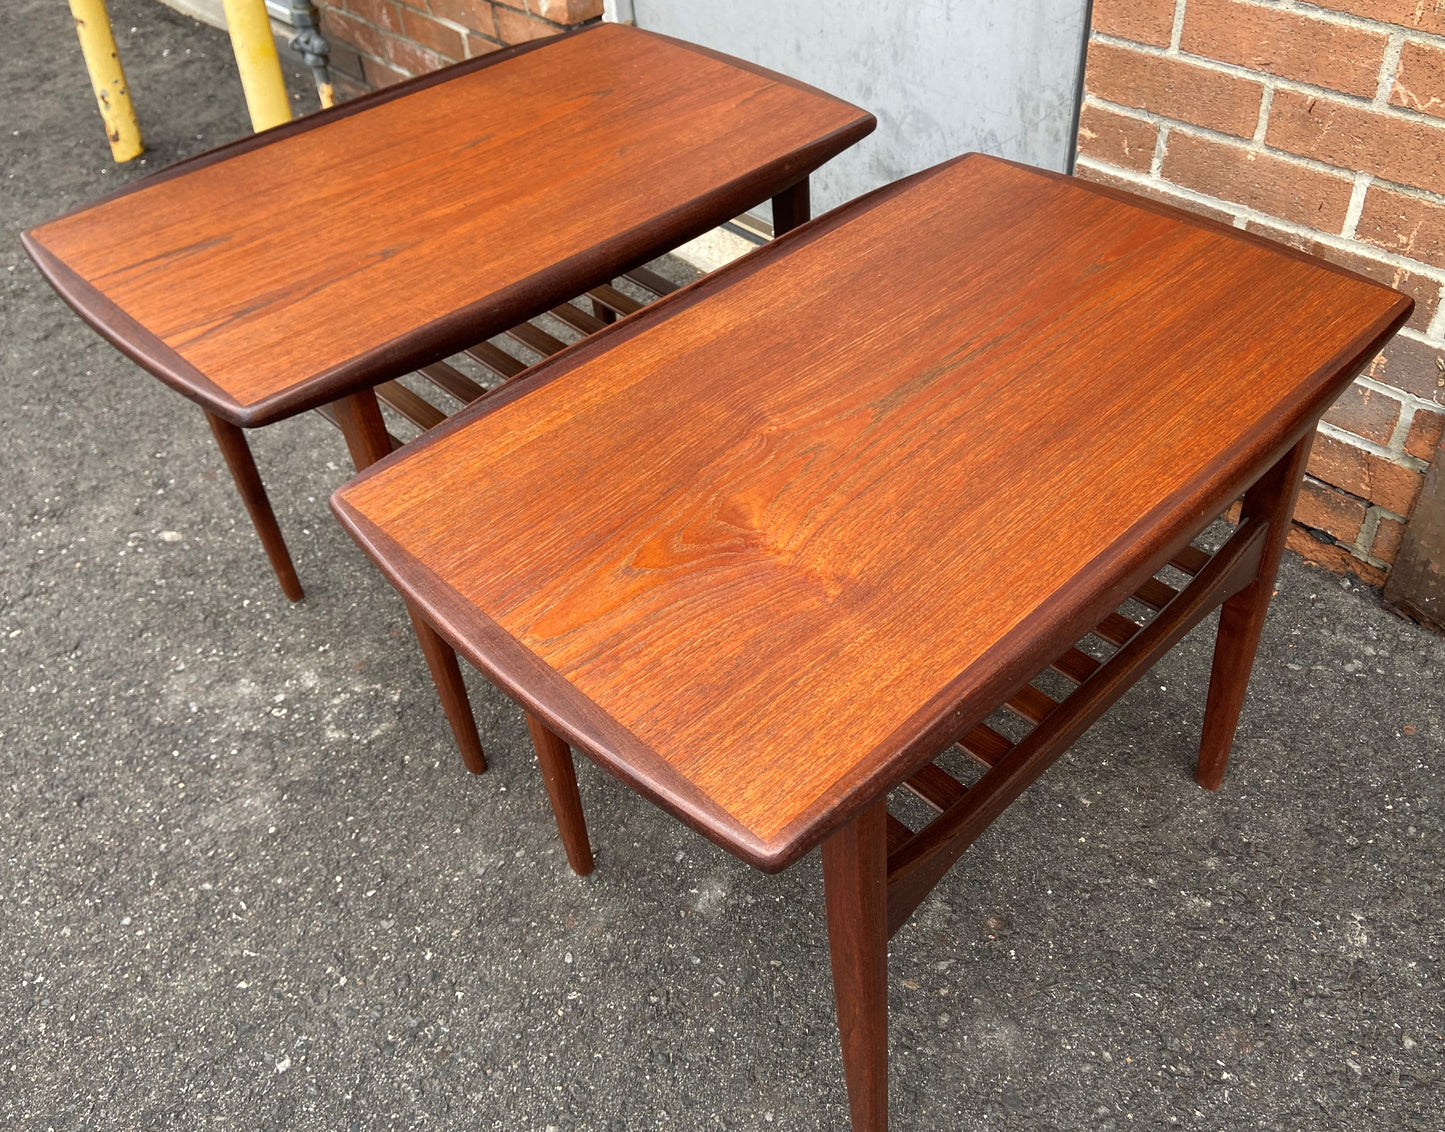 2 REFINISHED Mid Century Modern Teak End Tables w Shelves, Perfect